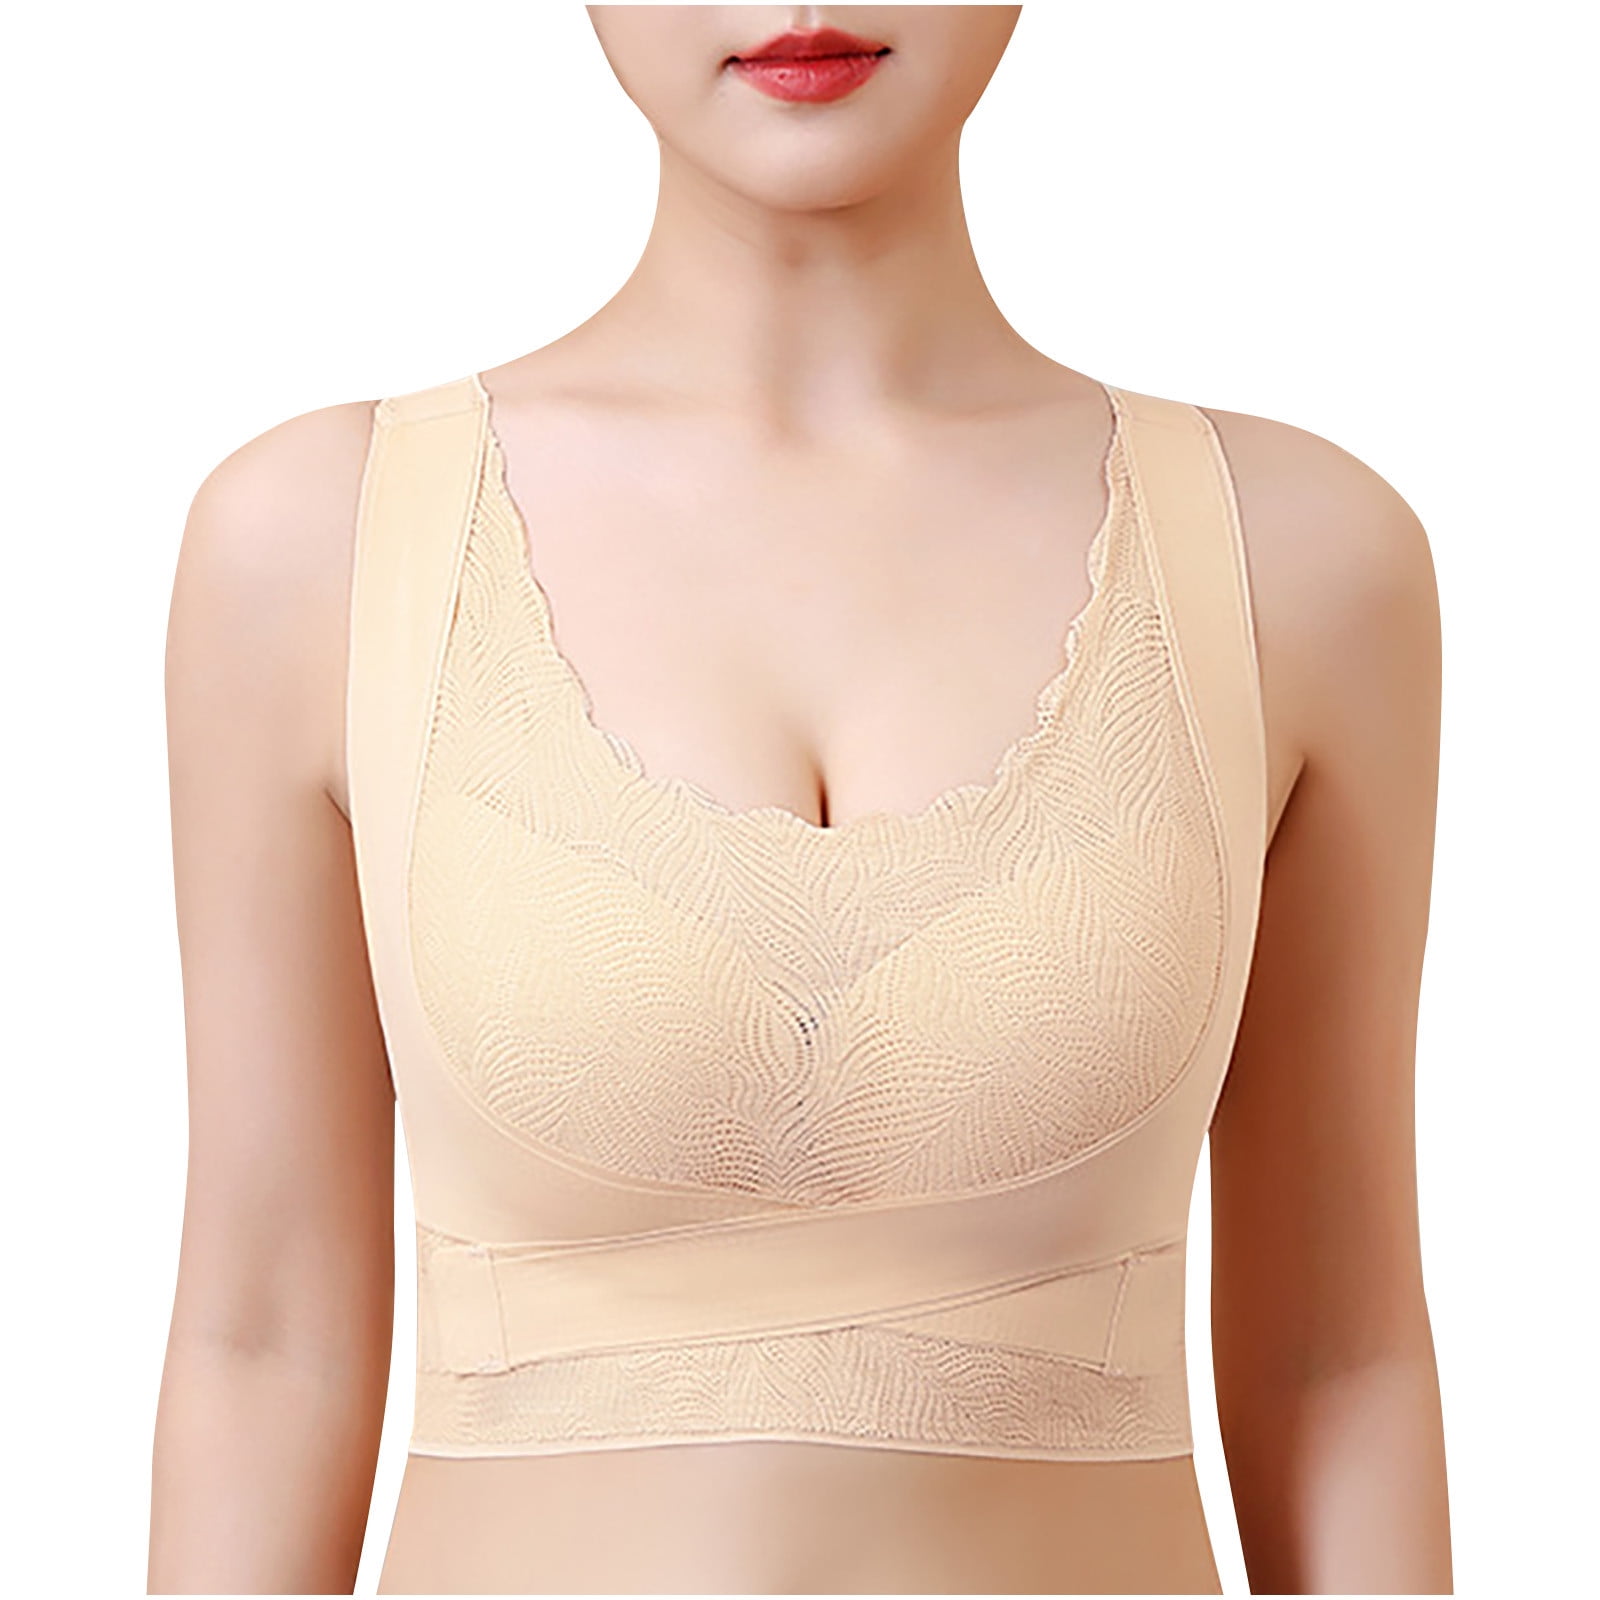 Bigersell Support Bras for Older Women Full-Coverage Summer Tube Tops Bra  for Women T-Shirt Bra Style R3786 V-Neck Back-Smoothing Bras Pull-On Bra  Closure Women's Plus Size Workout Tops Hot Pink M 